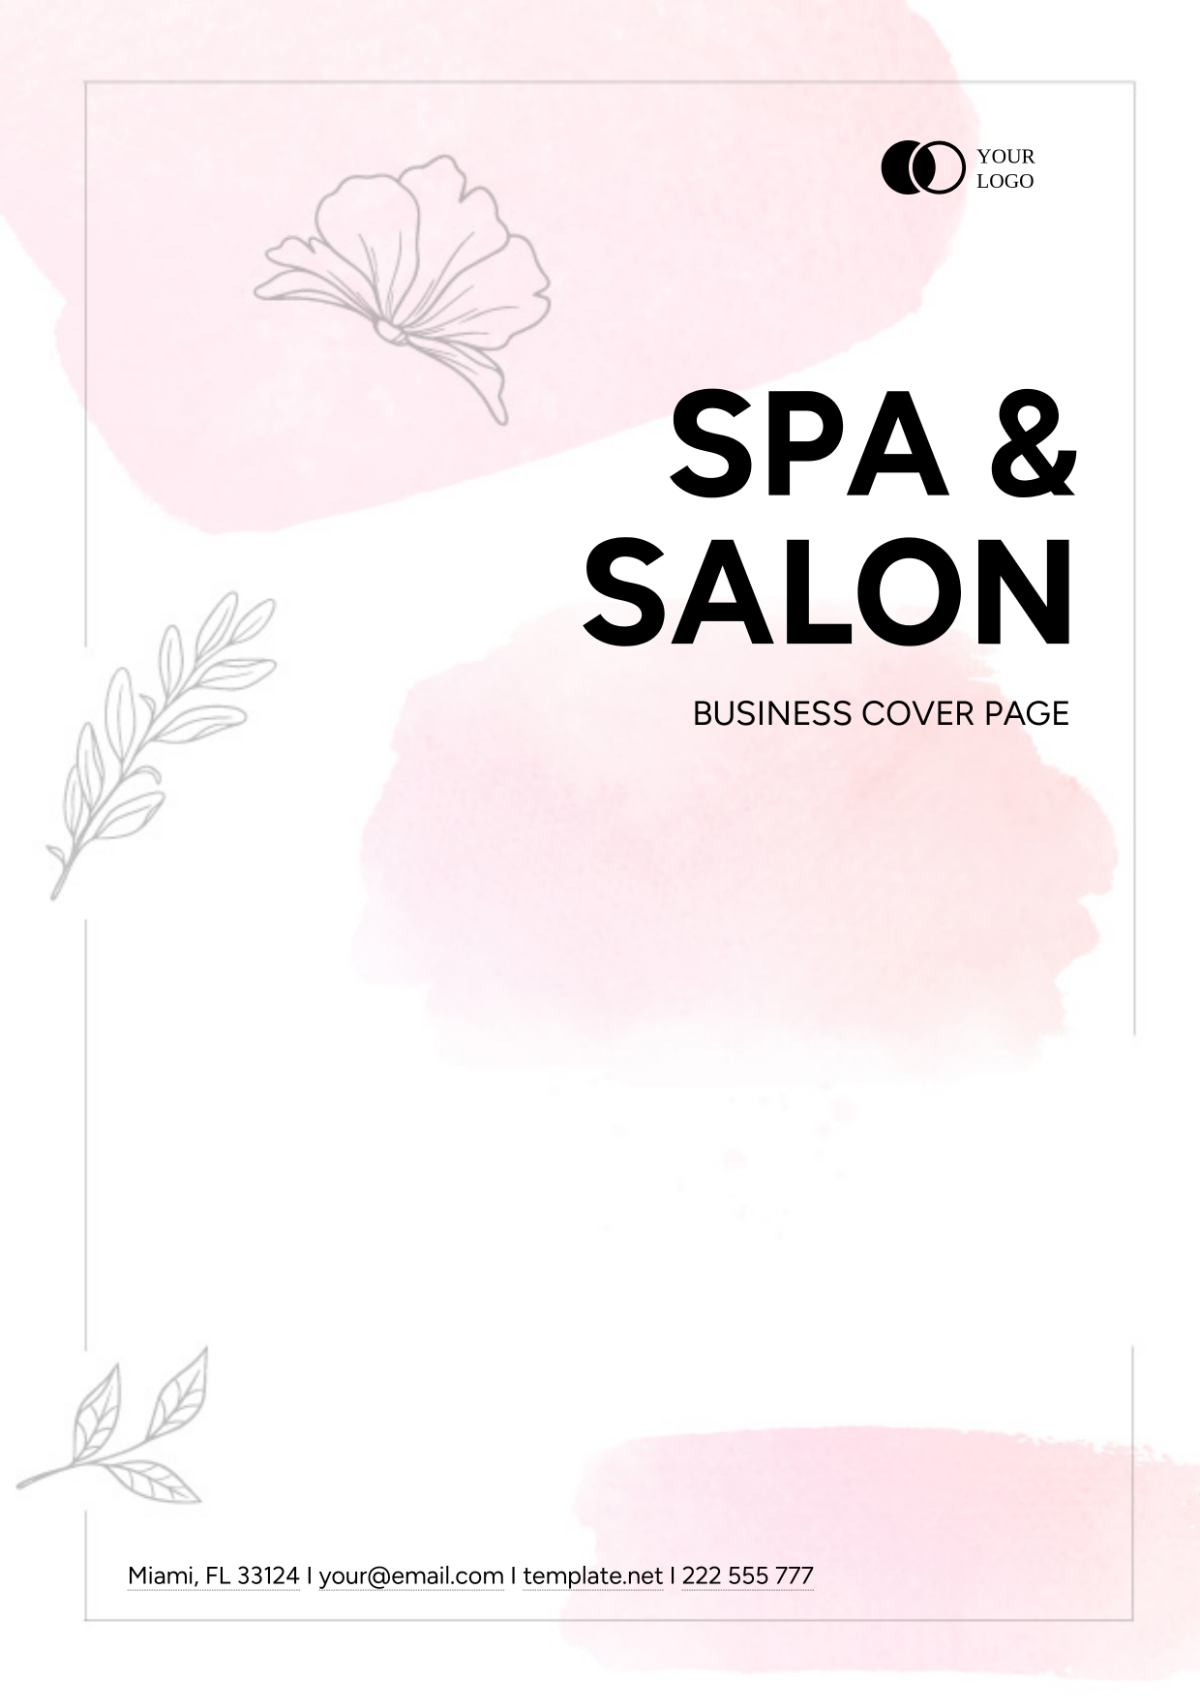 Salon & Spa Business Cover Page Template